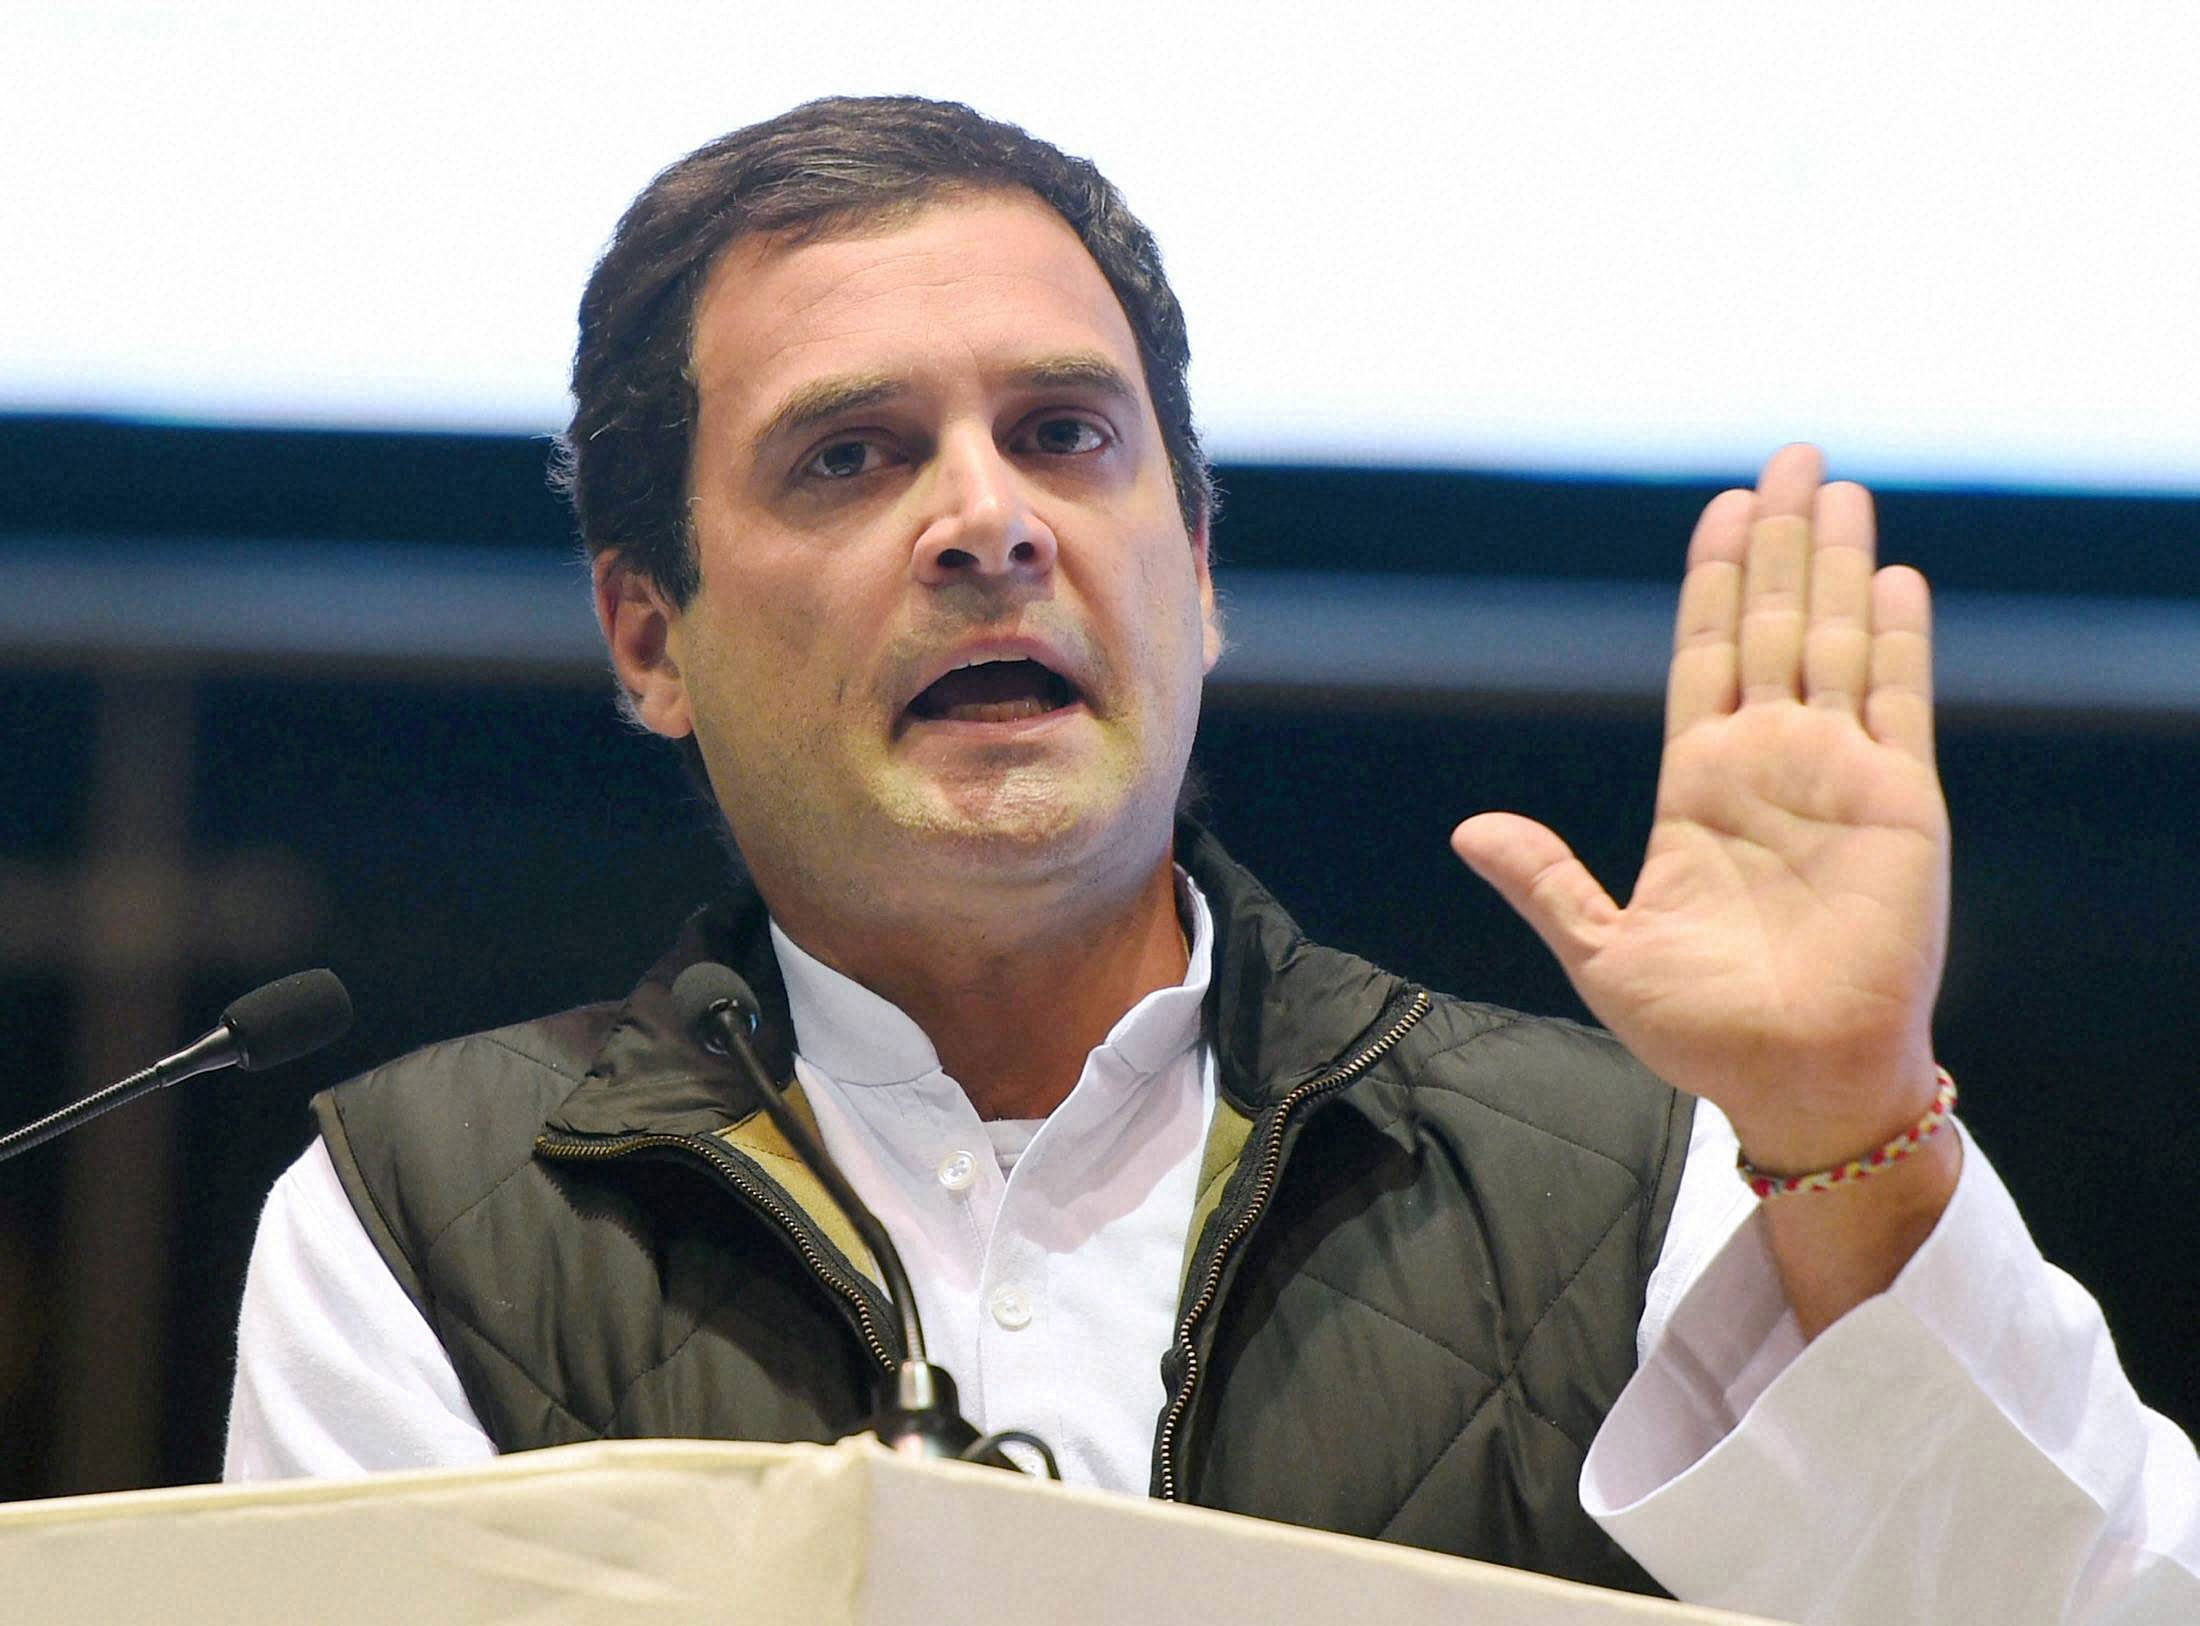 Congress Vice-President Rahul Gandhi said the Indian Army works for the country and there was no need for any political leader to make comments against the Army chief. PTI Photo